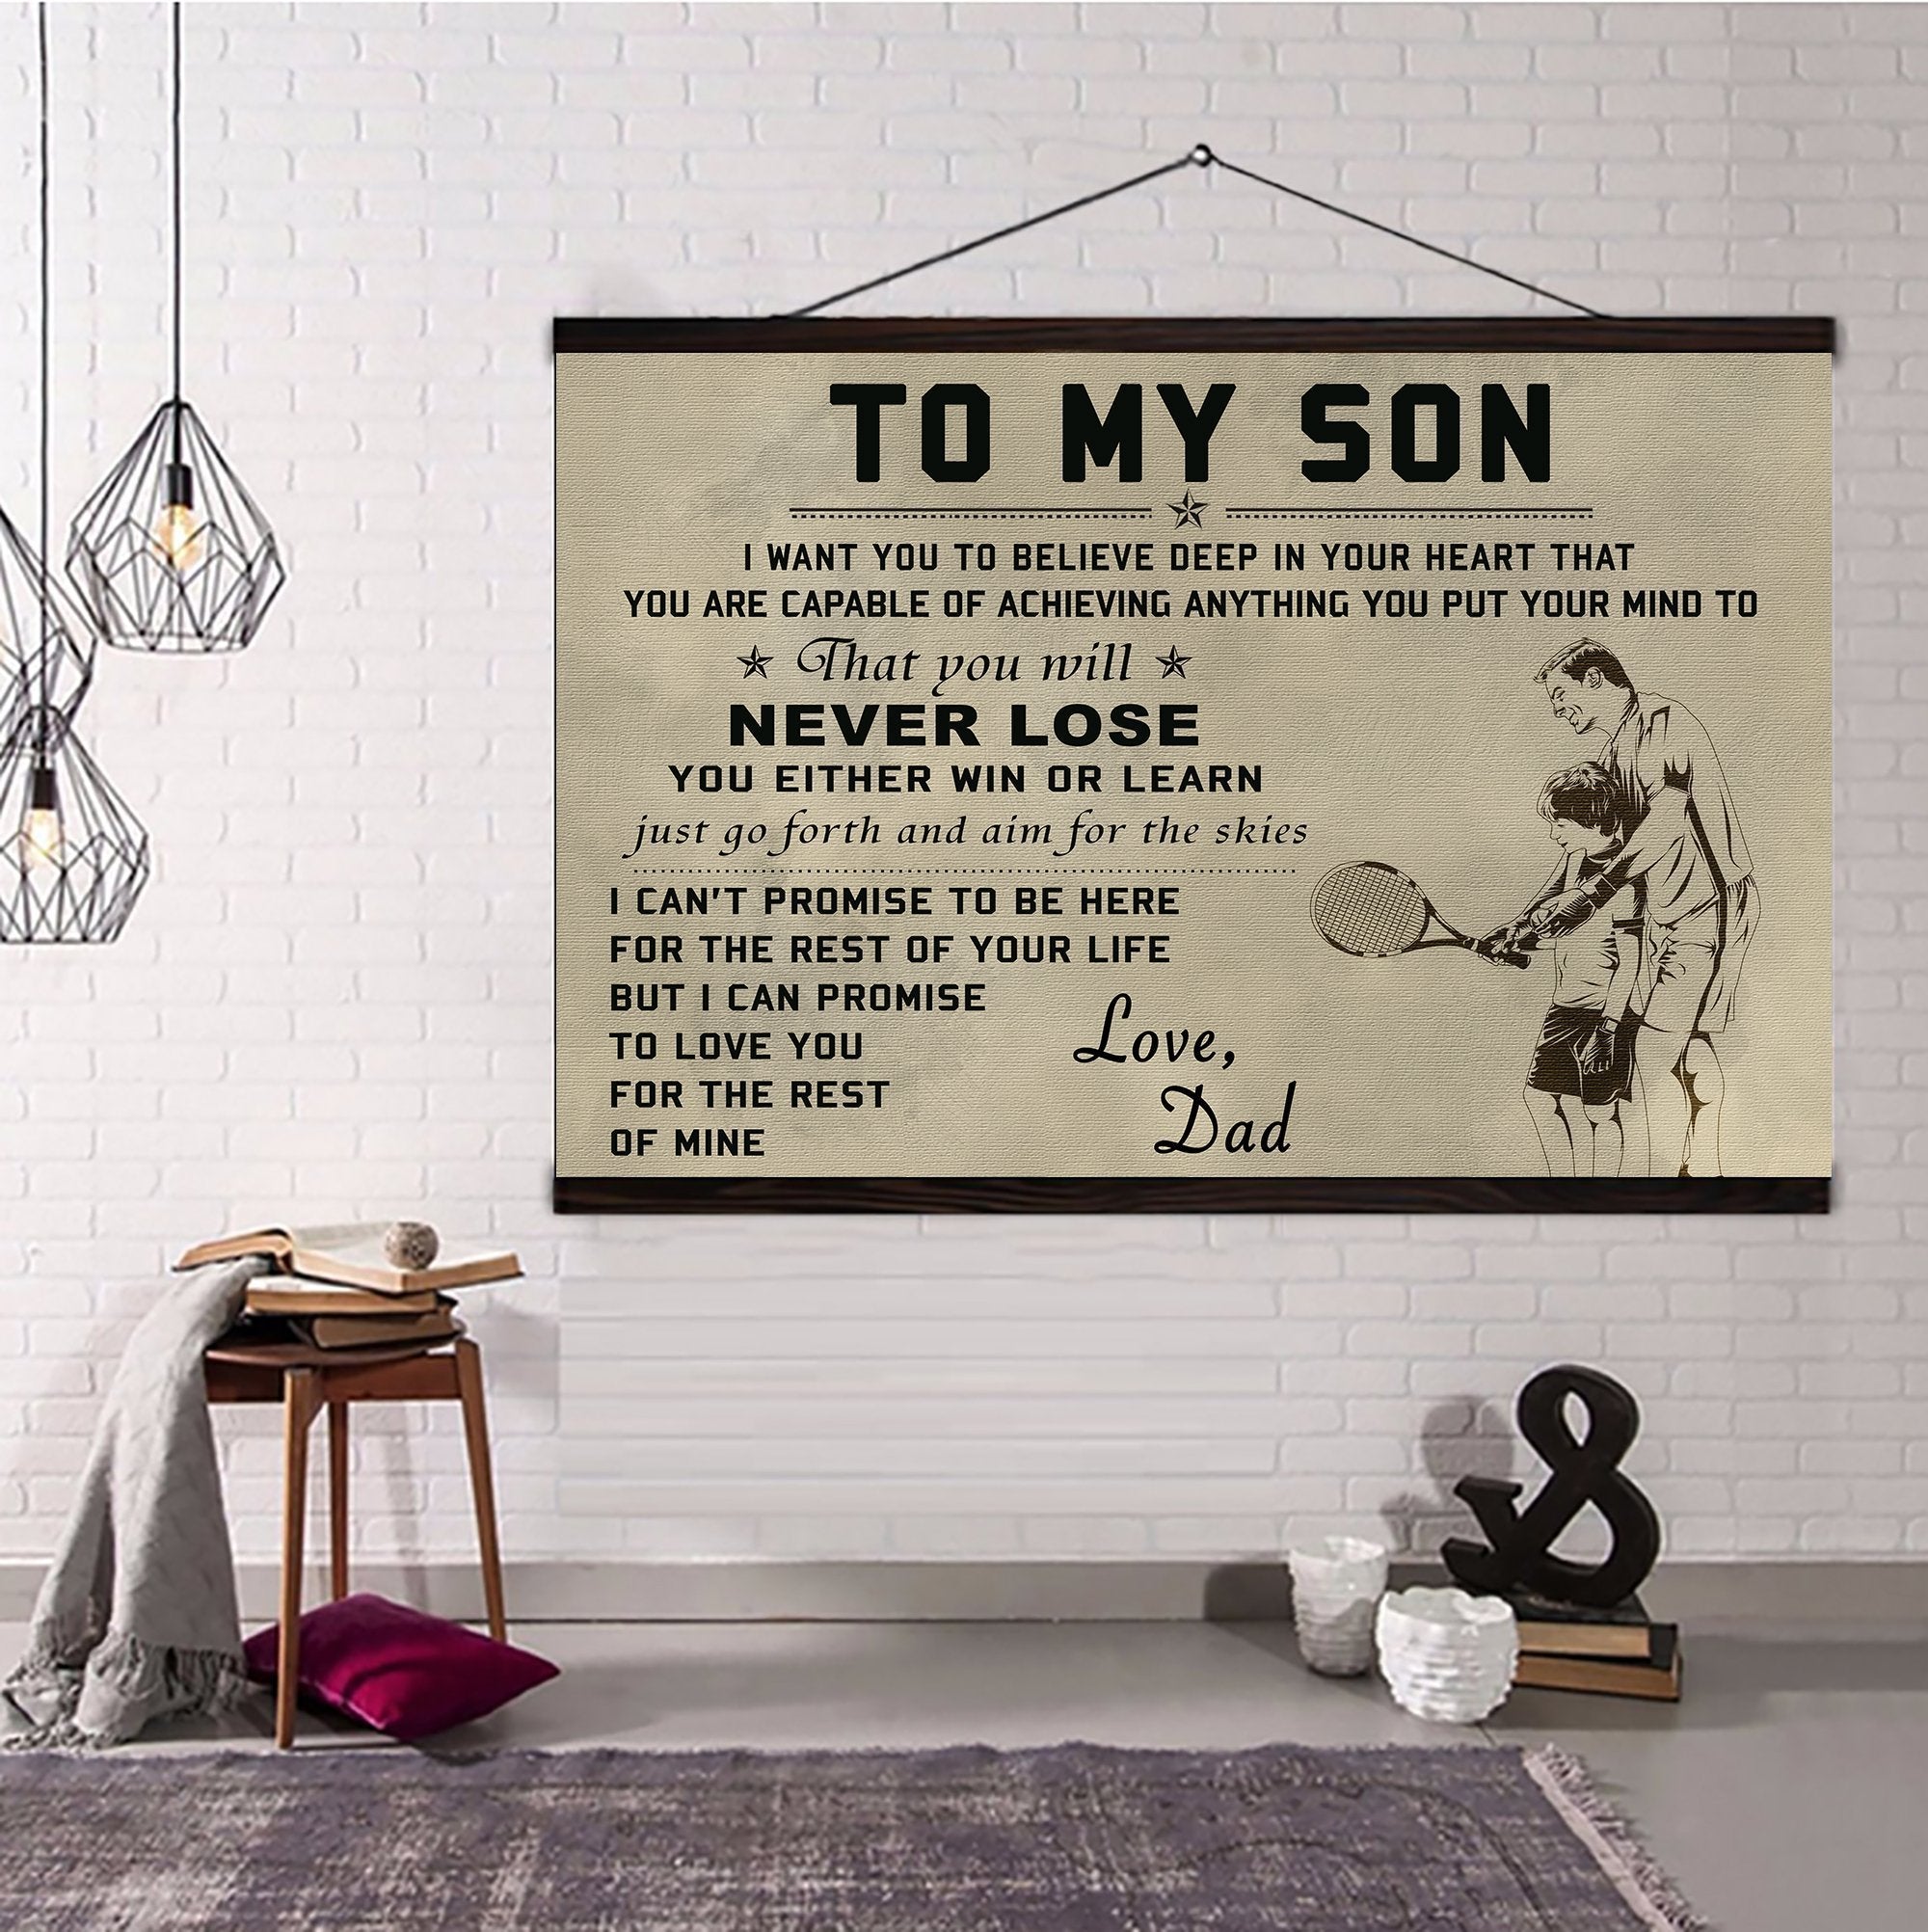 Tennis Hanging Canvas Dad Son Never Lose wall decor visual art - GIFTCUSTOM